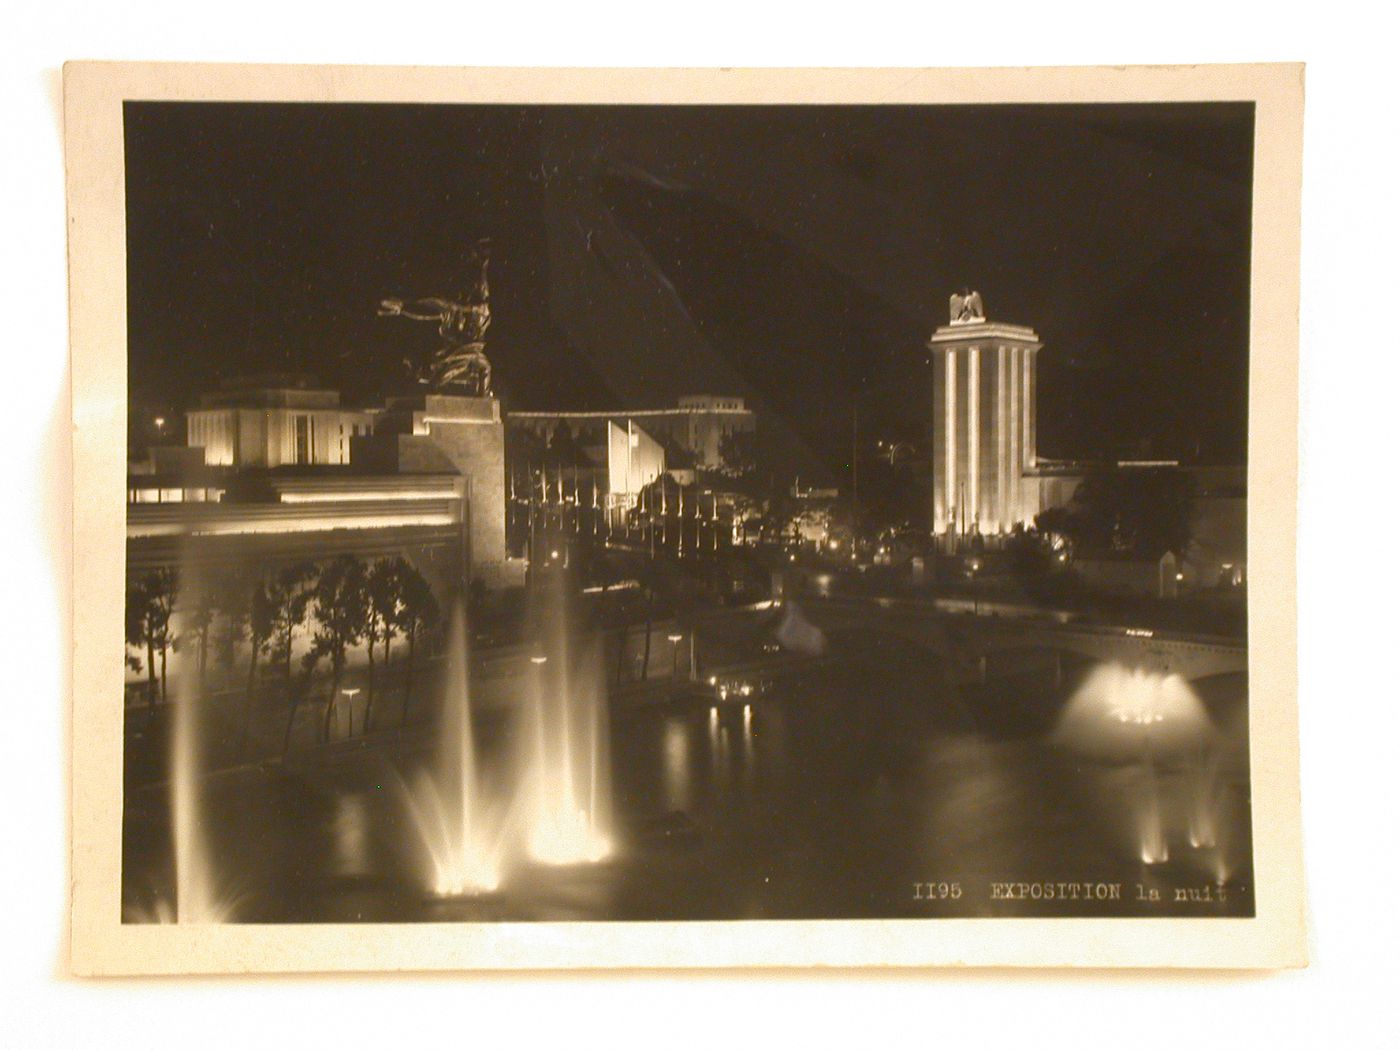 Night view of the USSR's and Germany's pavilions and the Trocadero, 1937 Exposition internationale, Paris, France